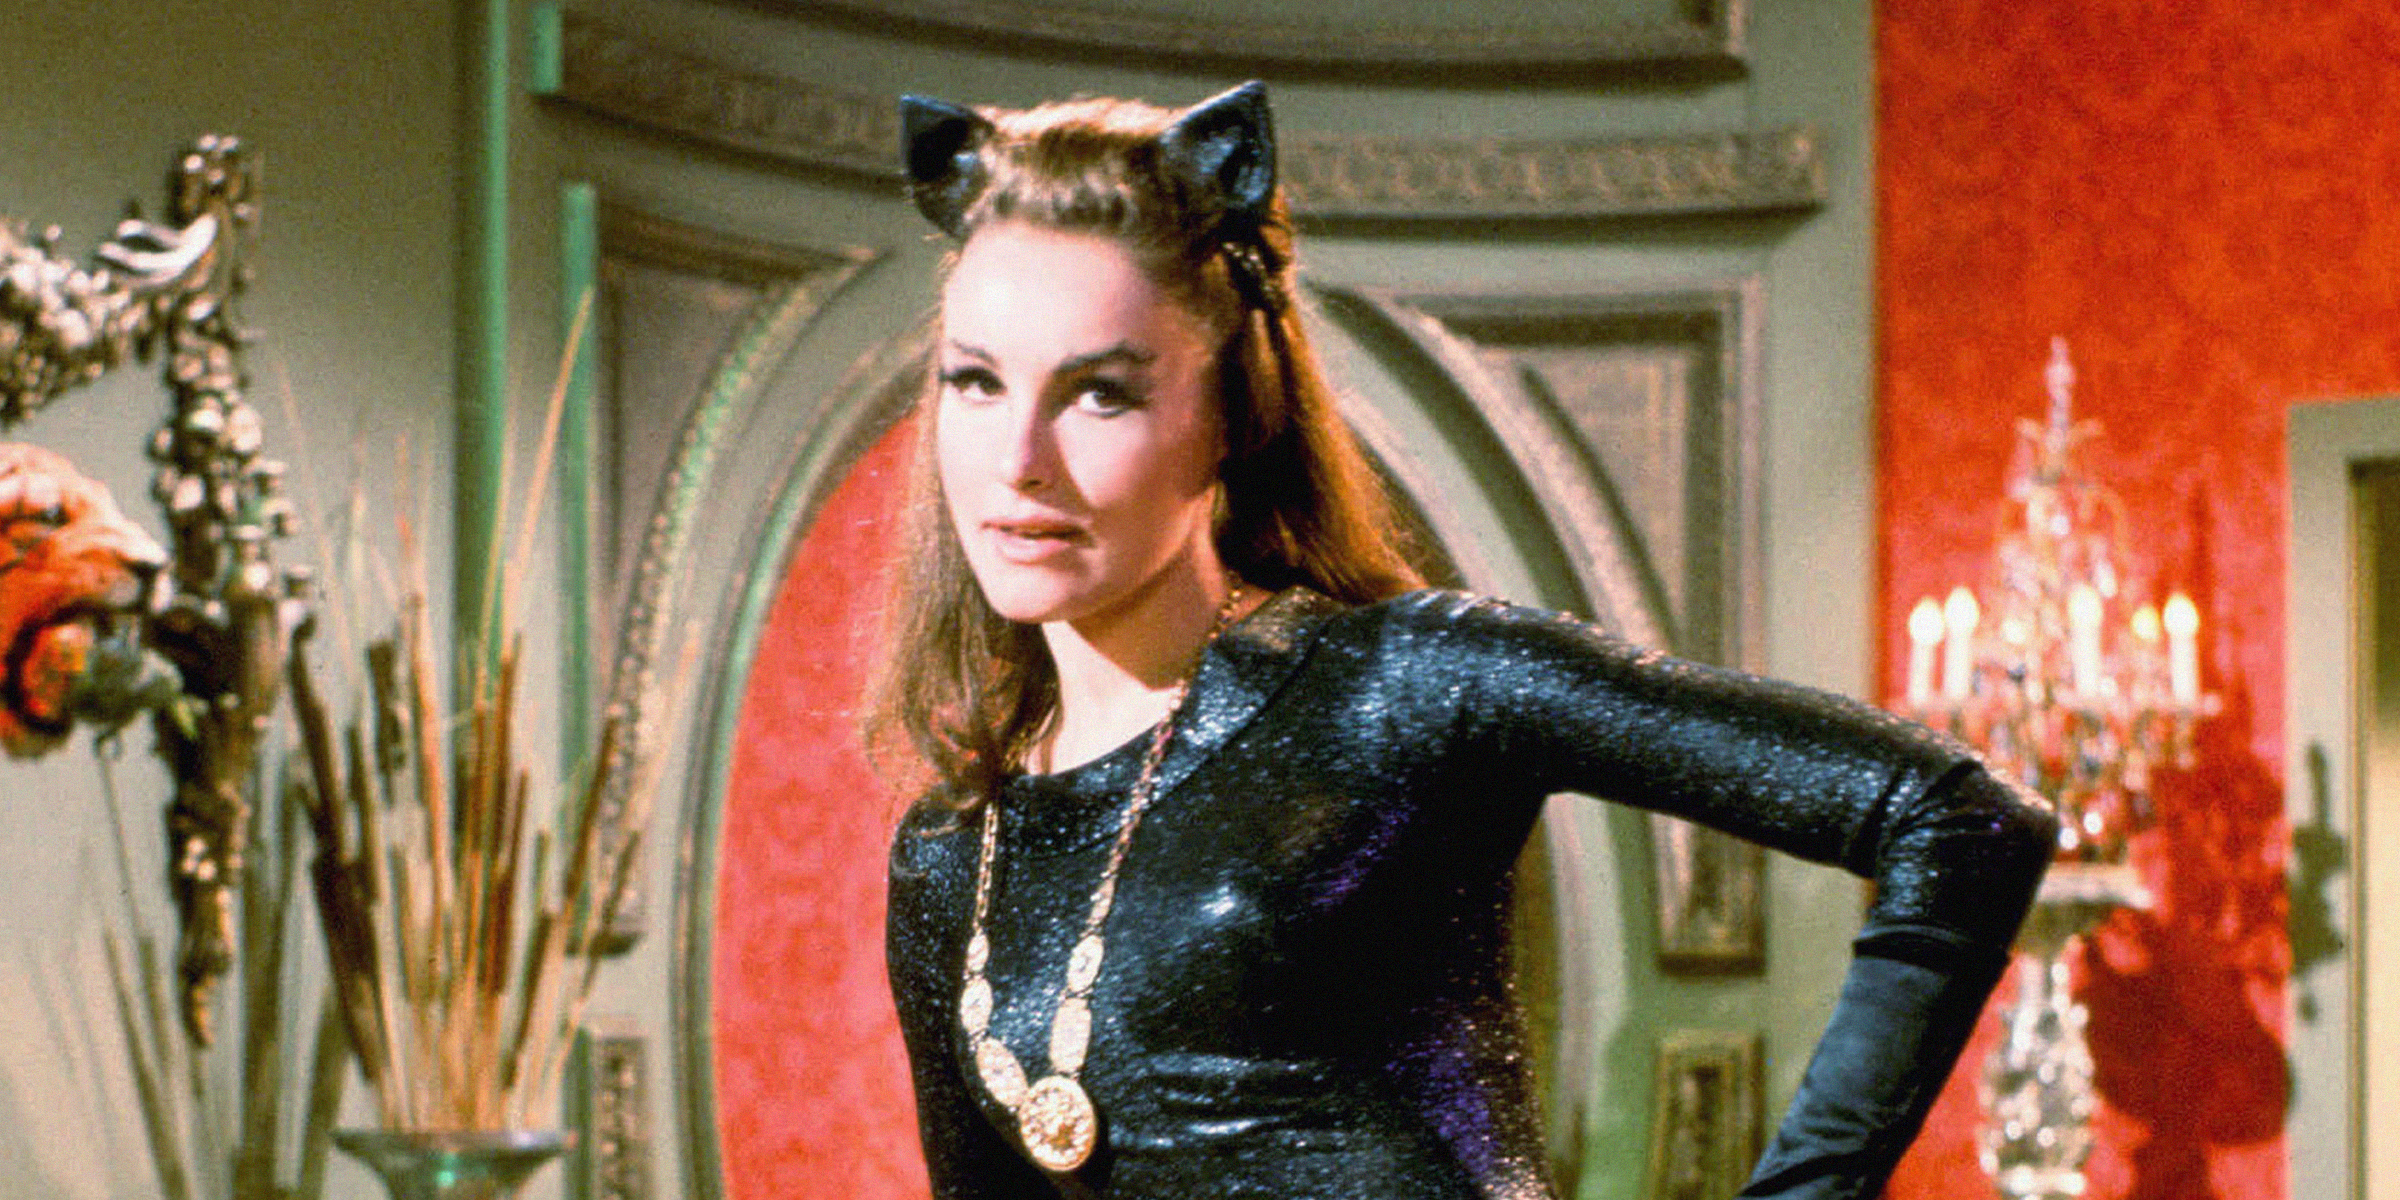 TEXT: Happy 90th birthday! | Julie Newmar | Source: Getty Images